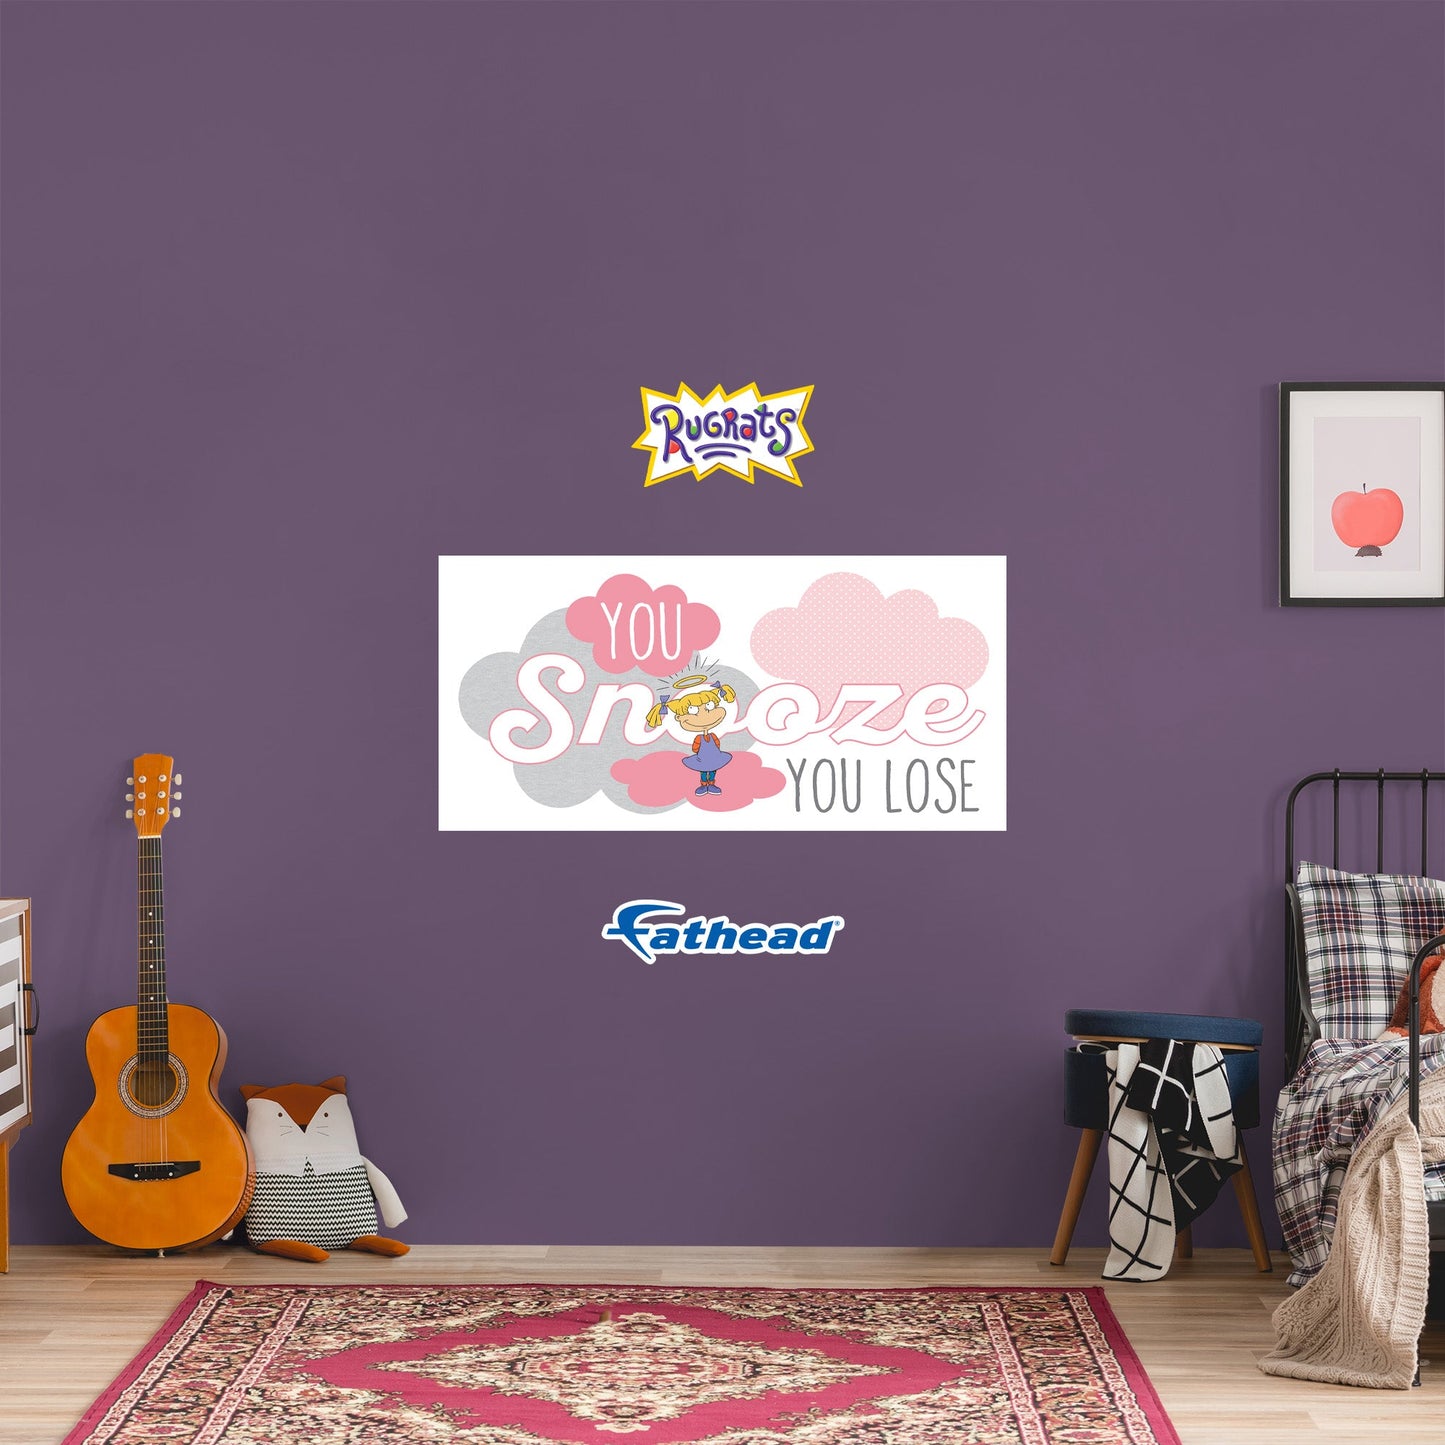 Rugrats: You Snooze You Loose Poster - Officially Licensed Nickelodeon Removable Adhesive Decal